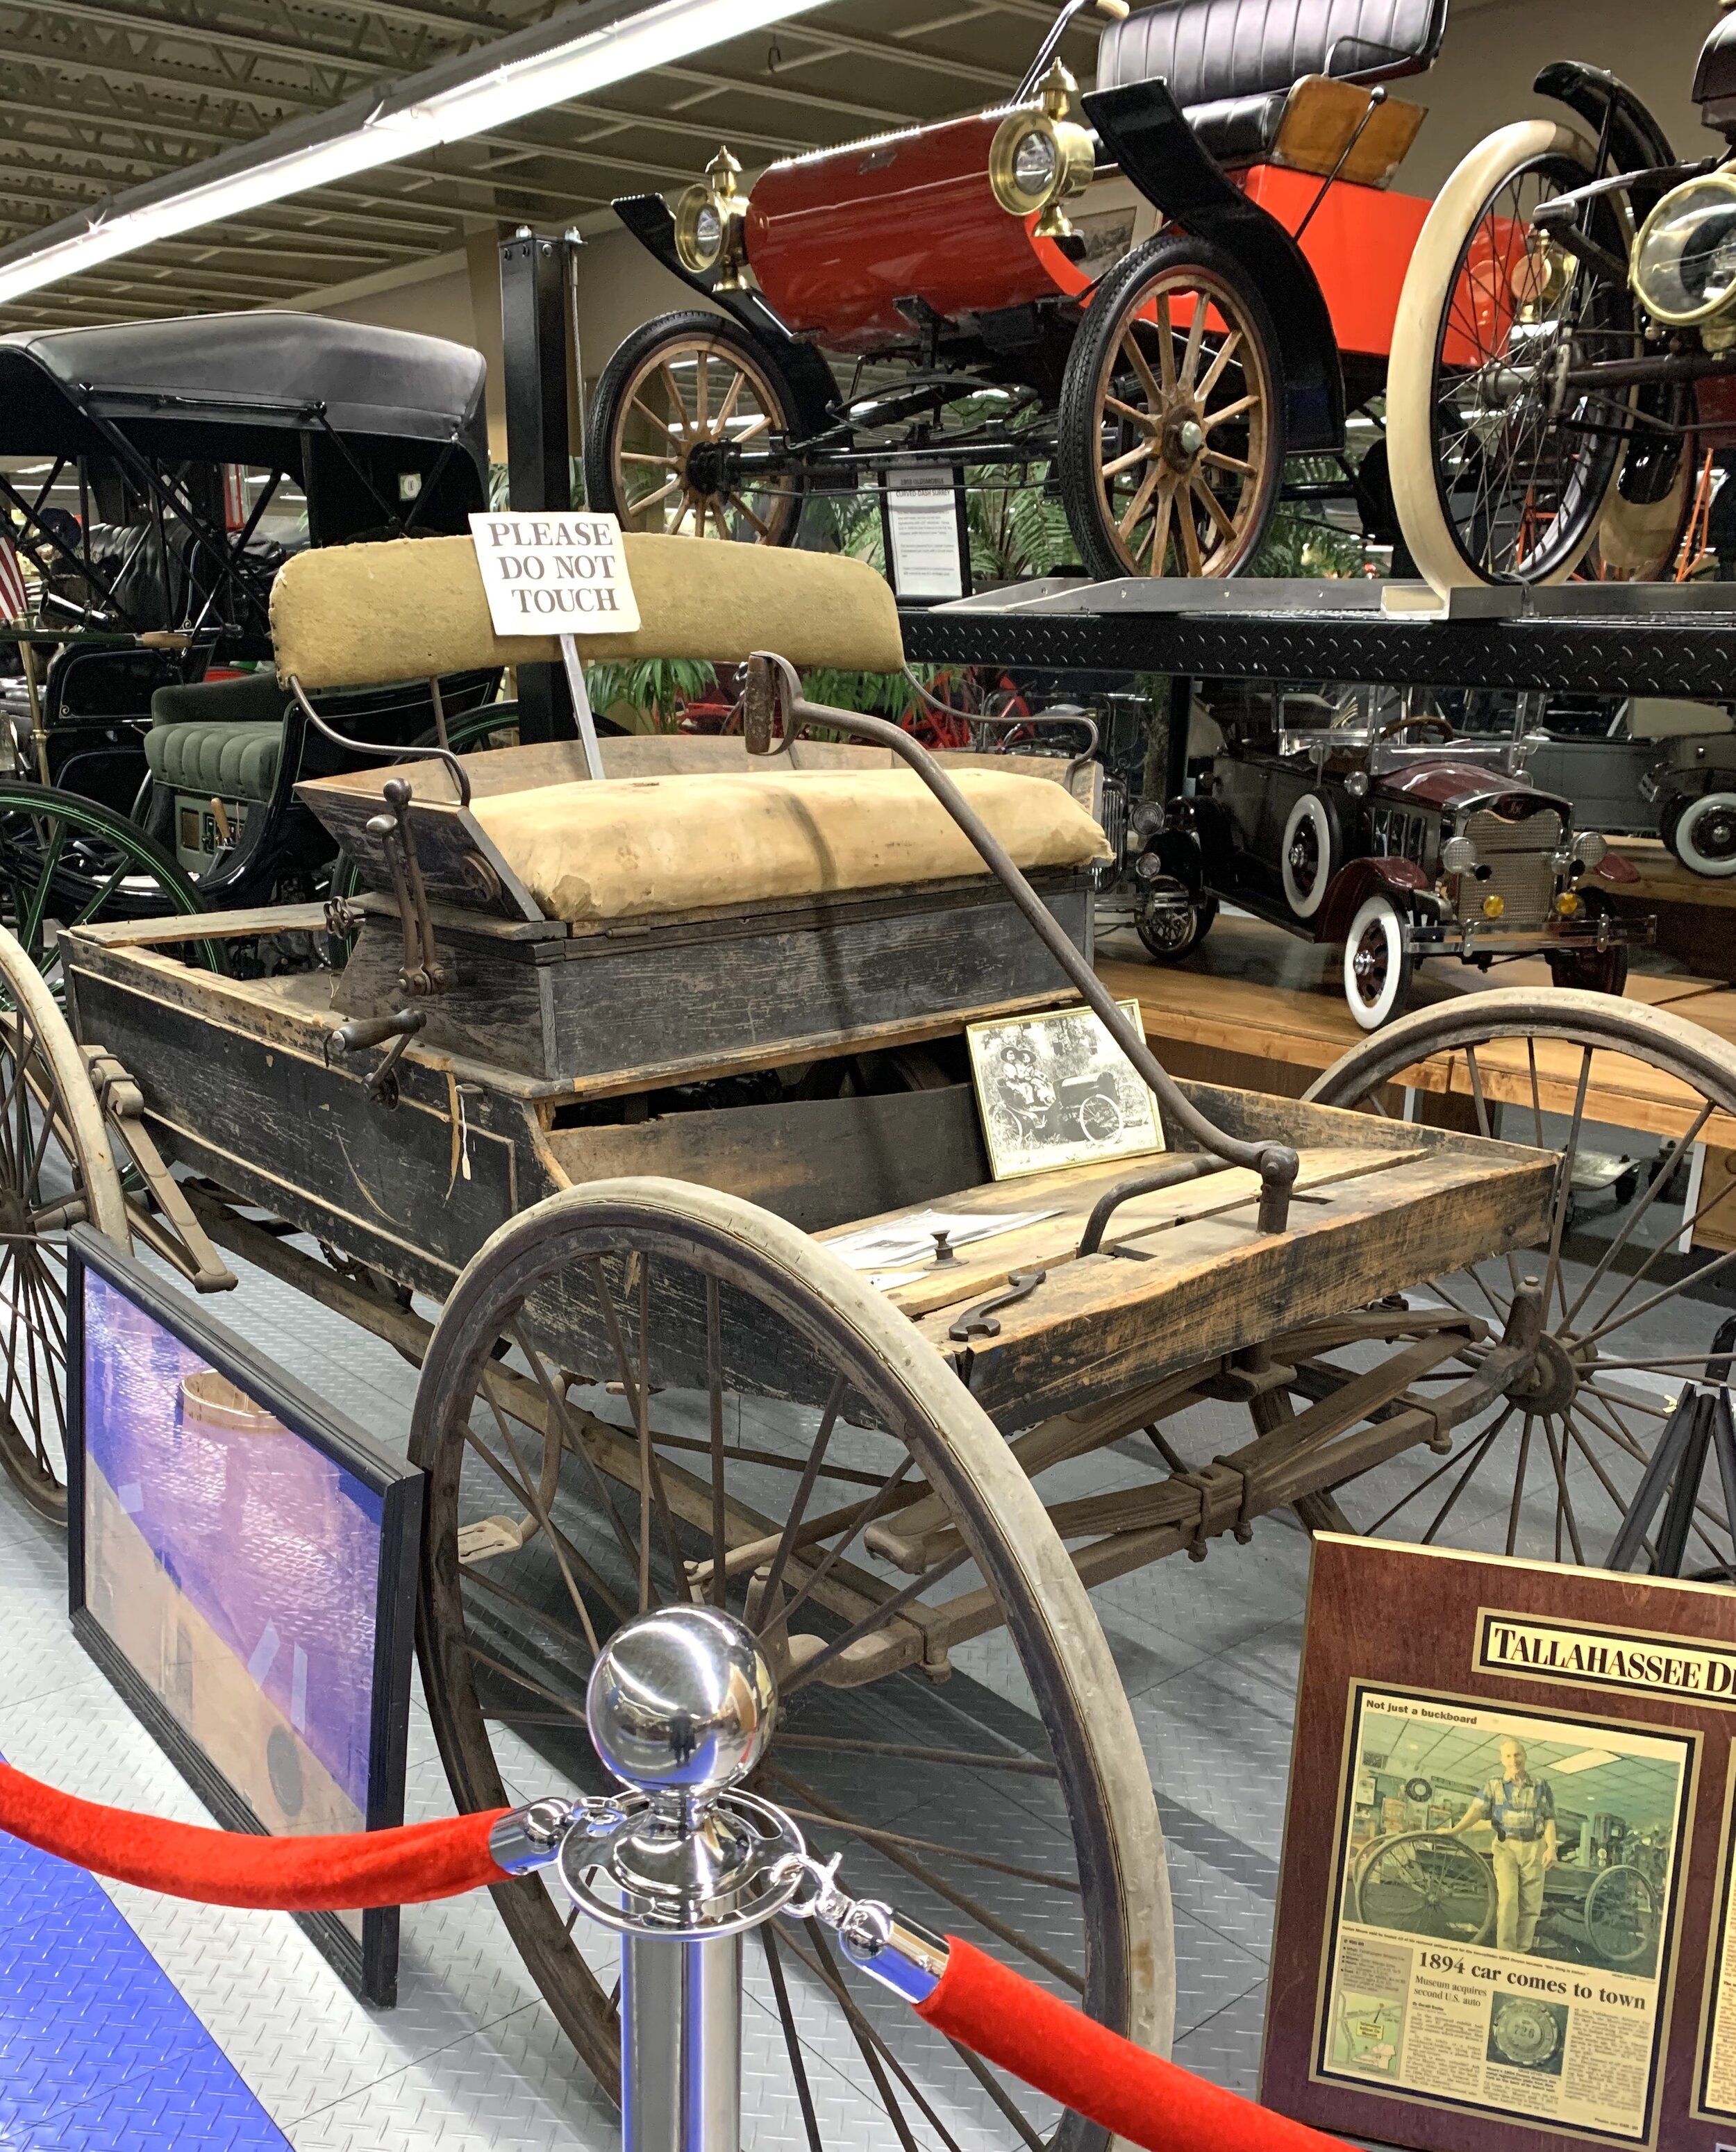  The Tallassee Auto Museum displayed over 190 autos from Devoe Moore’s collection. This one is his most prized. He doesn’t tell  exactly  how much he paid for it, but antique collectors know he traded 10 other cars for it, valuing approximately one m